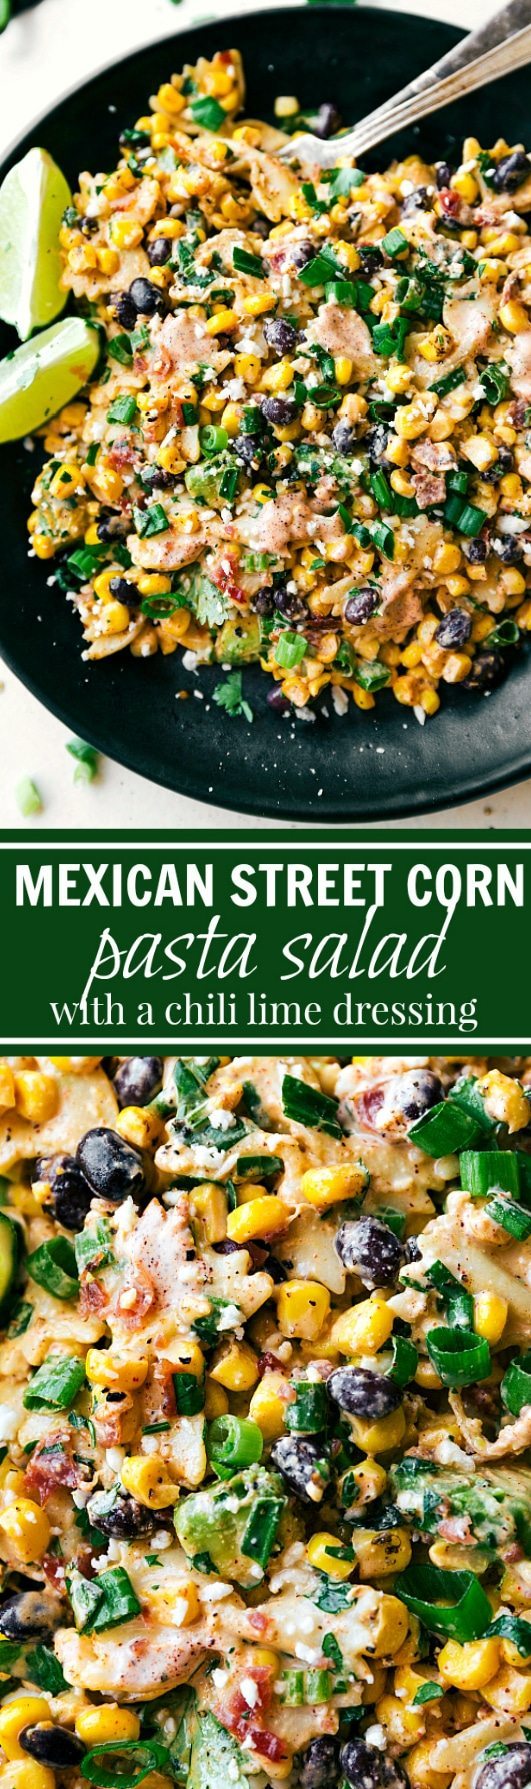 A delicious MEXICAN STREET CORN Pasta salad with tons of veggies, bacon, and a simple creamy CHILI LIME dressing. Recipe via chelseasmessyapron.com